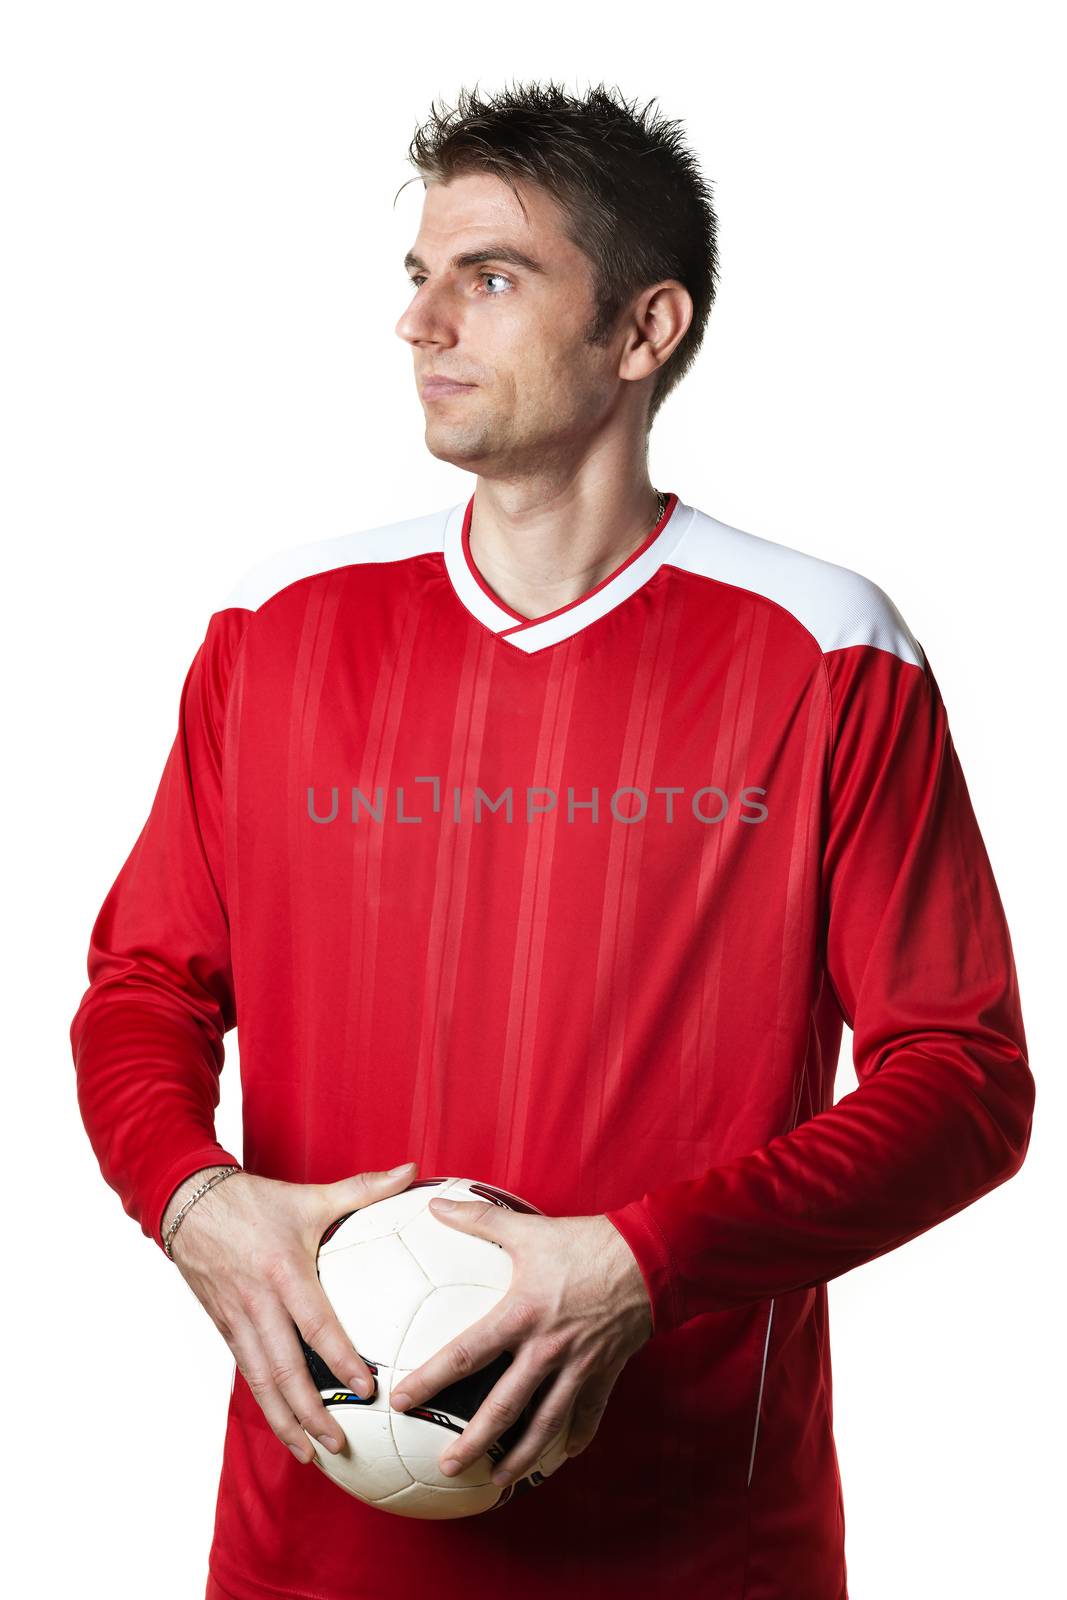 Image of soccer player with soccer ball and red shirt on white background